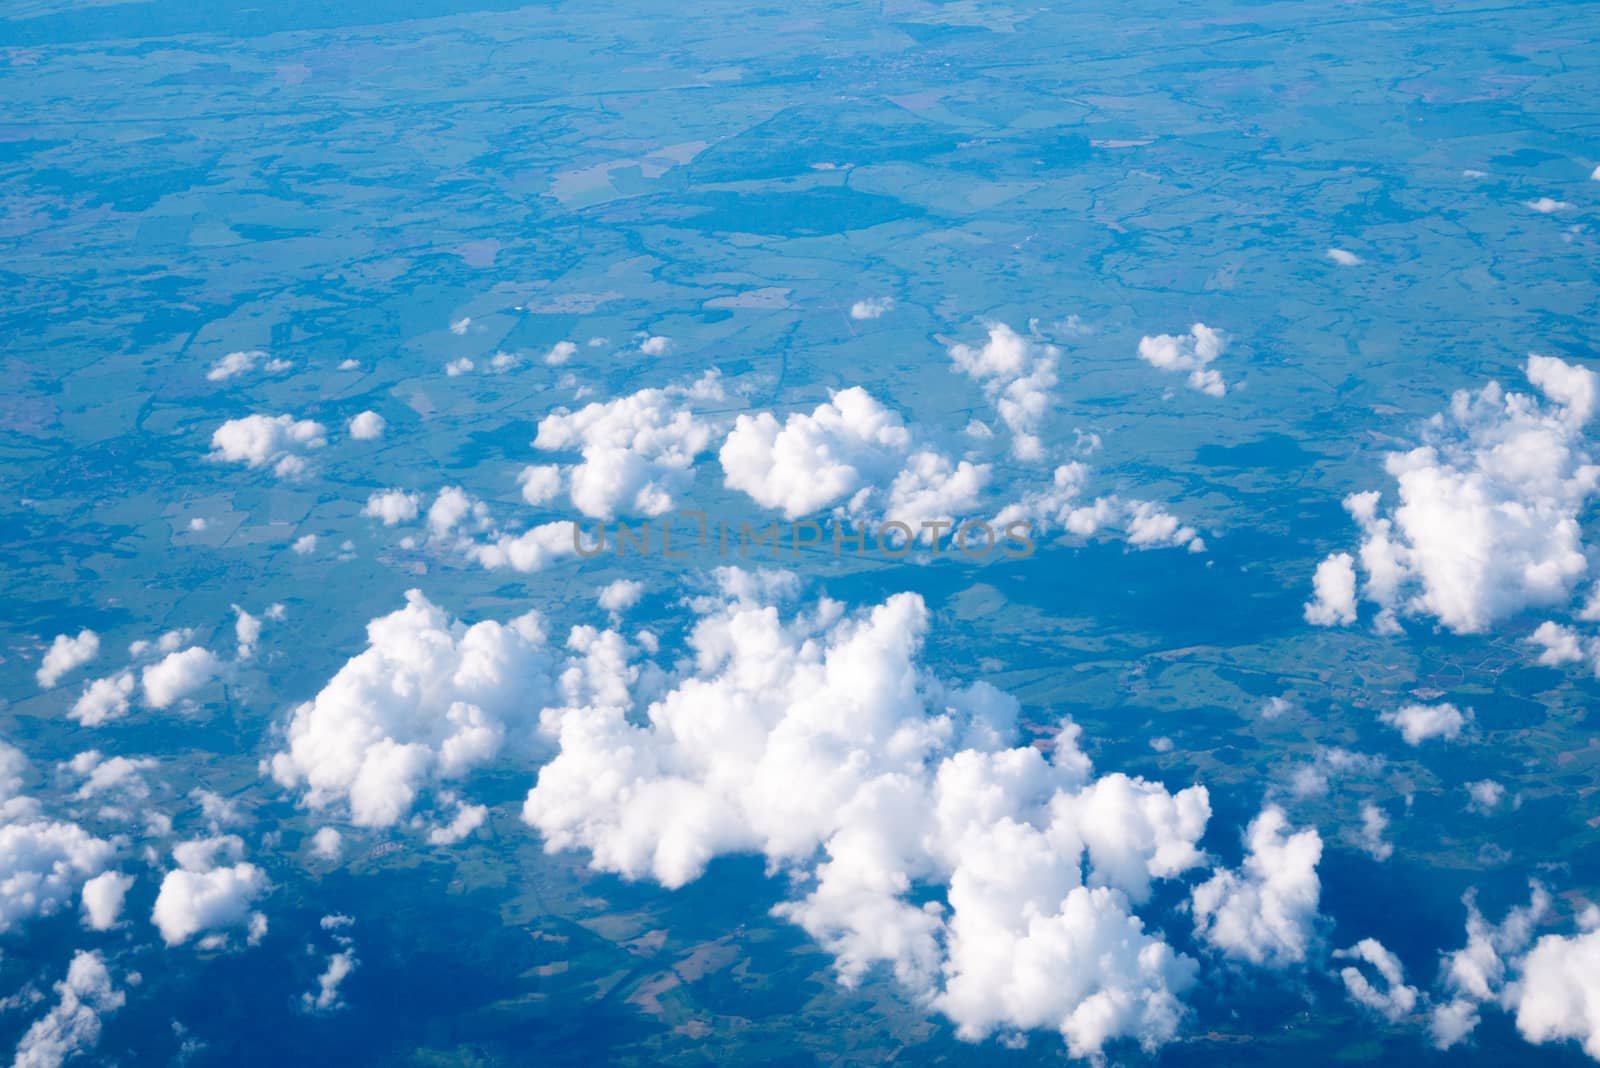 Clouds and sky sunny day through airplane window by Alicephoto